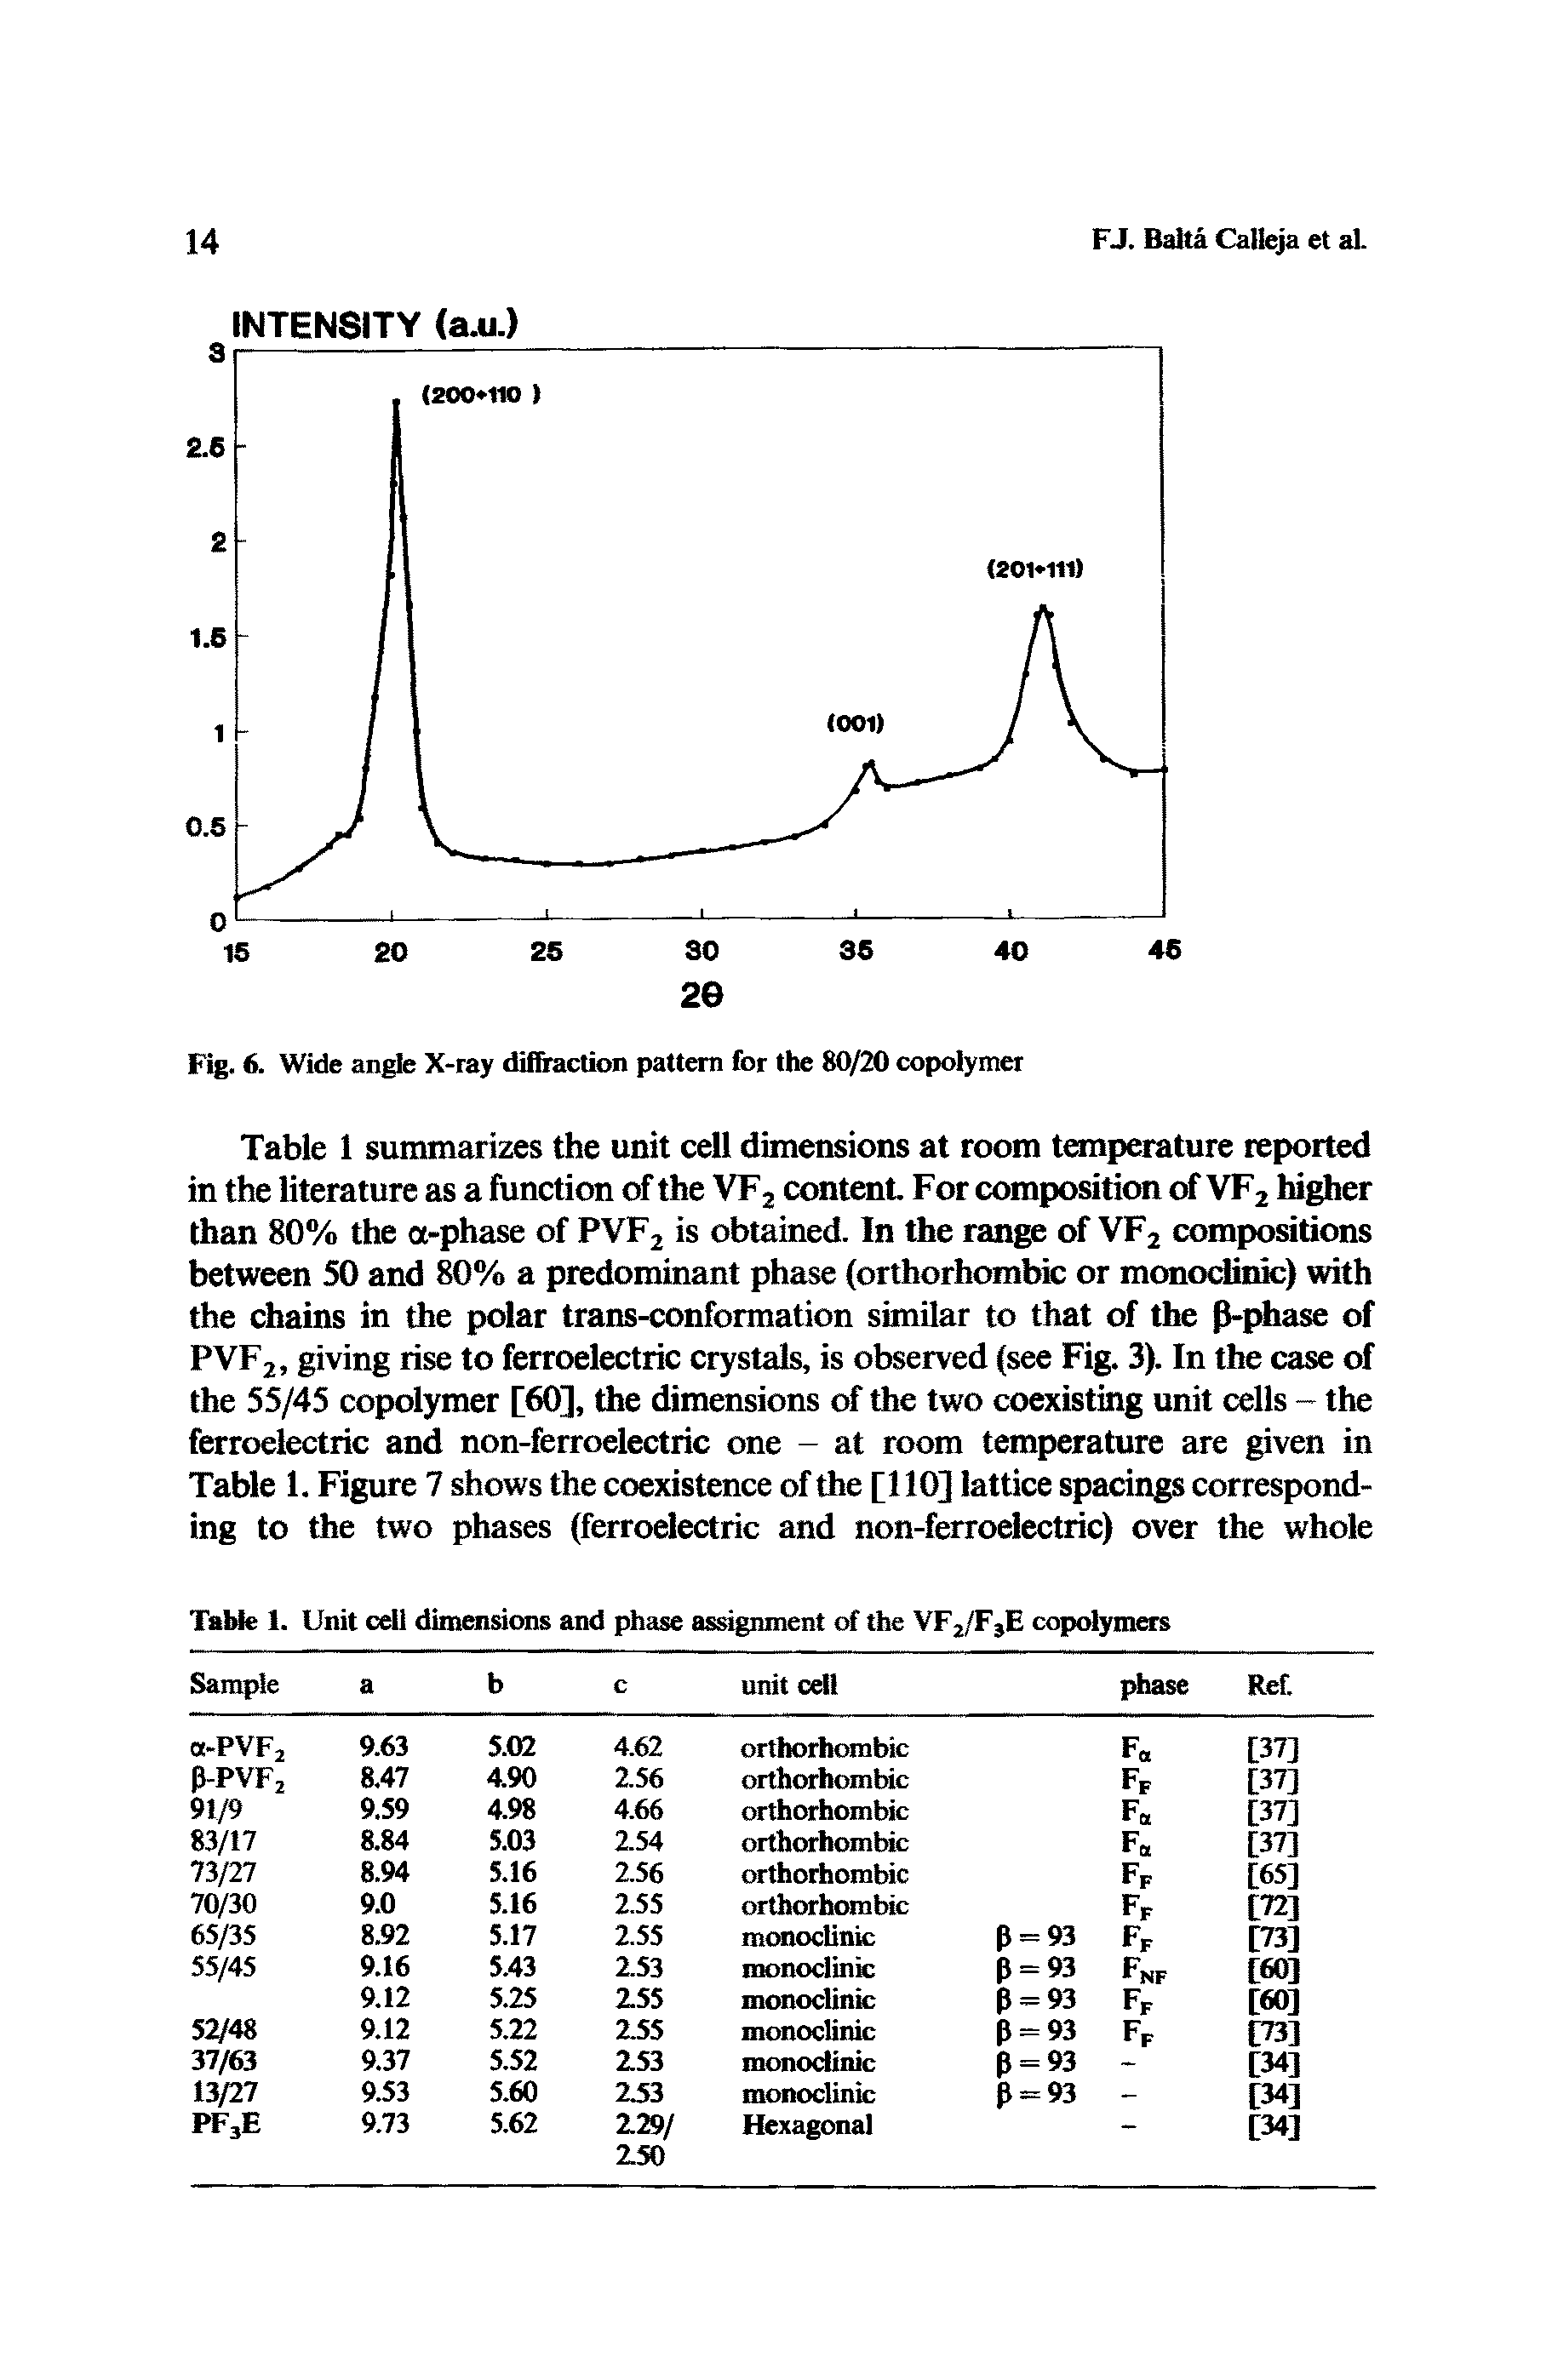 Table 1 summarizes the unit cell dimensions at room temperature reported in the literature as a function of the VF, content For composition of VF2 higher than 80% the a-phase of PVF2 is obtained. In the range of VF2 compositions between 50 and 80% a predominant phase (orthorhombic or monoclinic) with the chains in the polar trans-conformation similar to that of the P-phase of PVF2, giving rise to ferroelectric crystals, is observed (see Fig. 3). In the case of the 55/45 copolymer [60], the dimensions of the two coexisting unit cells - the ferroelectric and non-ferroelectric one - at room temperature are given in Table 1. Figure 7 shows the coexistence of the [110] lattice spacings corresponding to the two phases (ferroelectric and non-ferroelectric) over the whole...